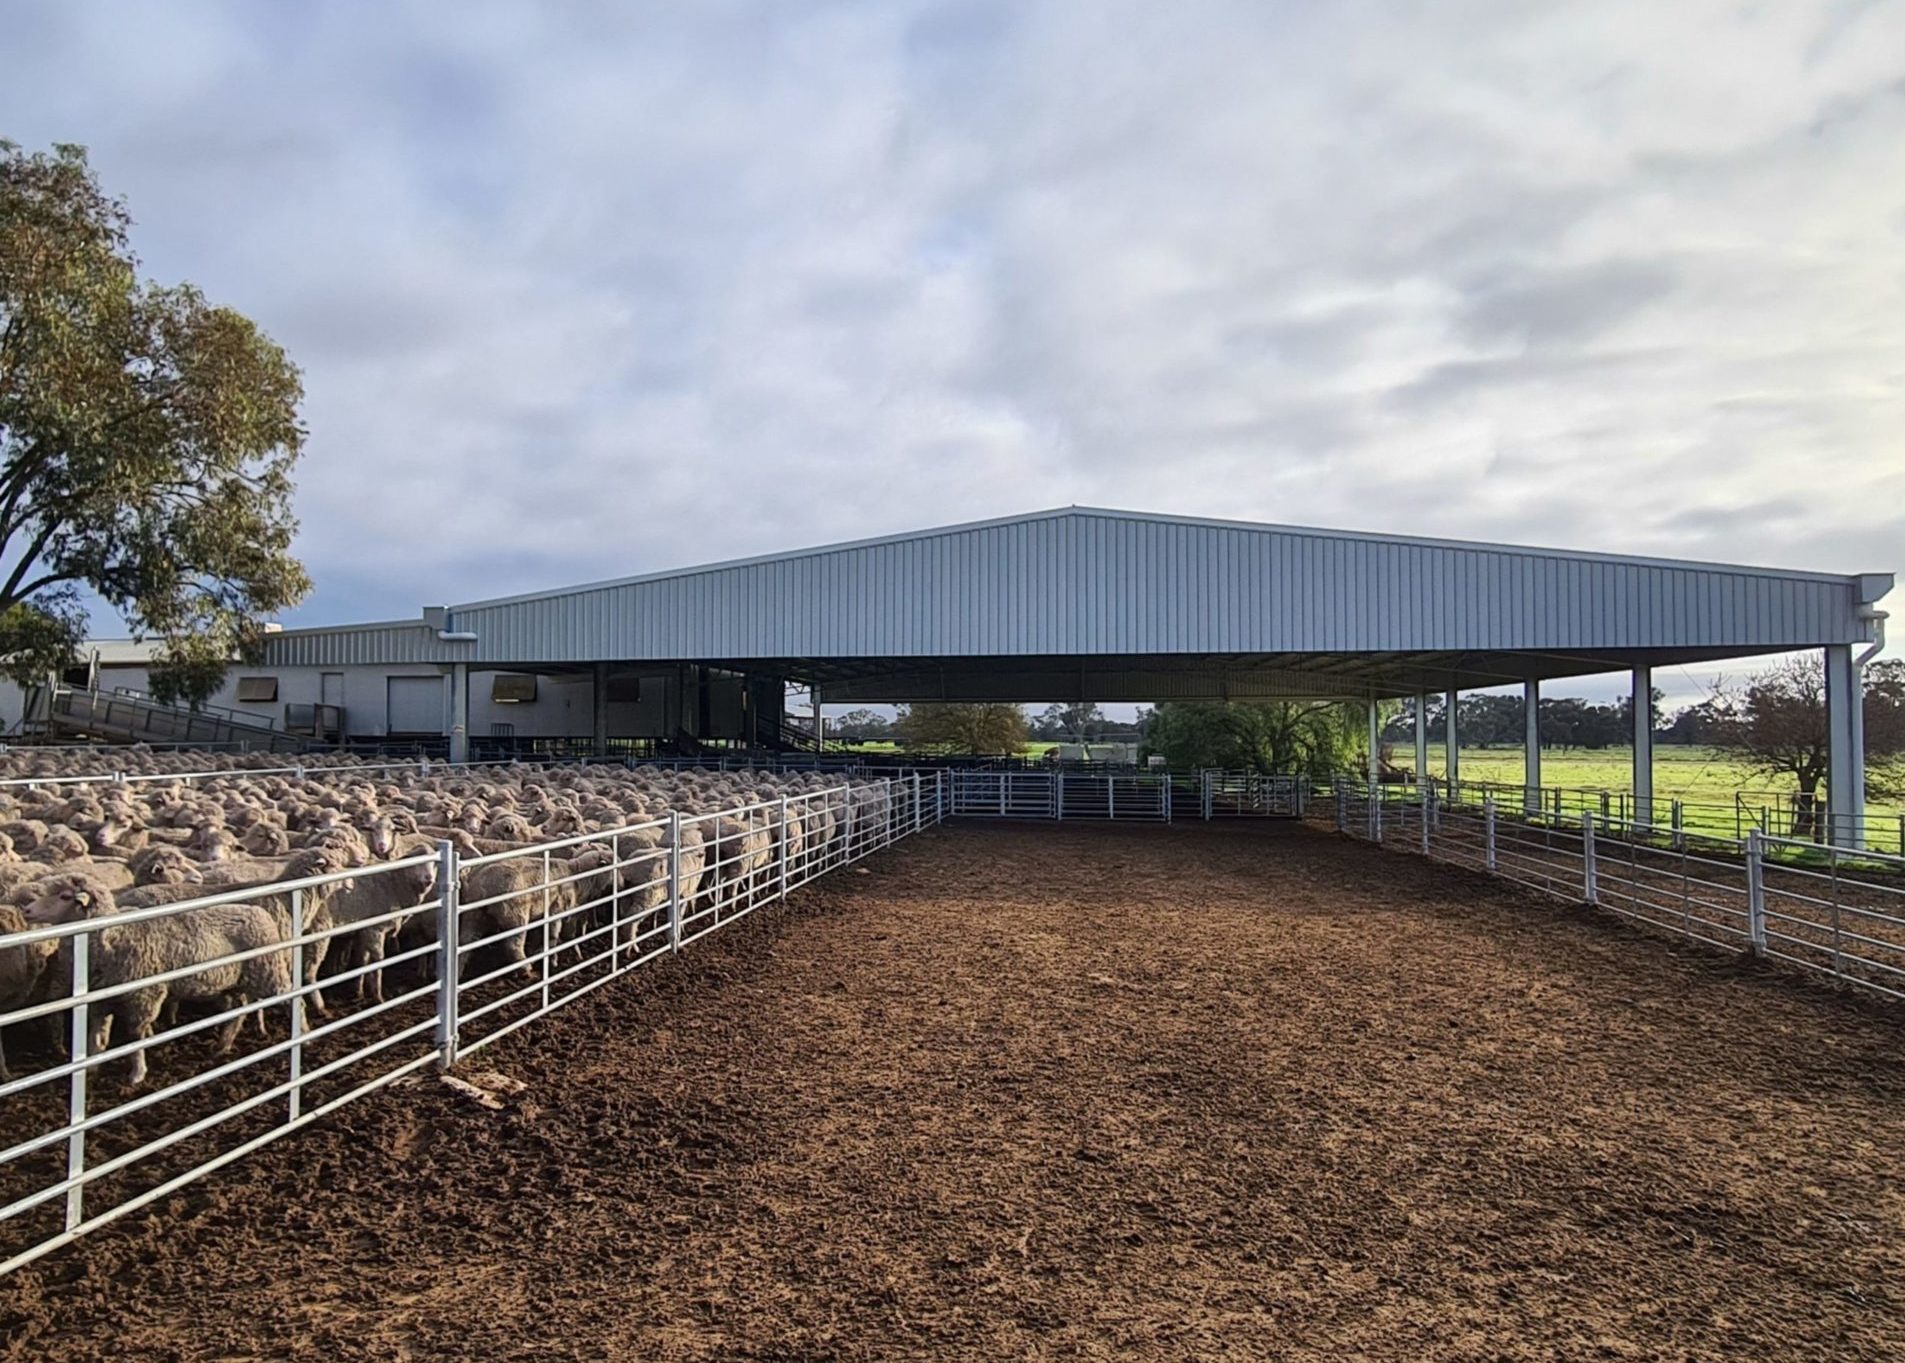 You are currently viewing 39.4m x 27m x 4.1m sheep yard cover